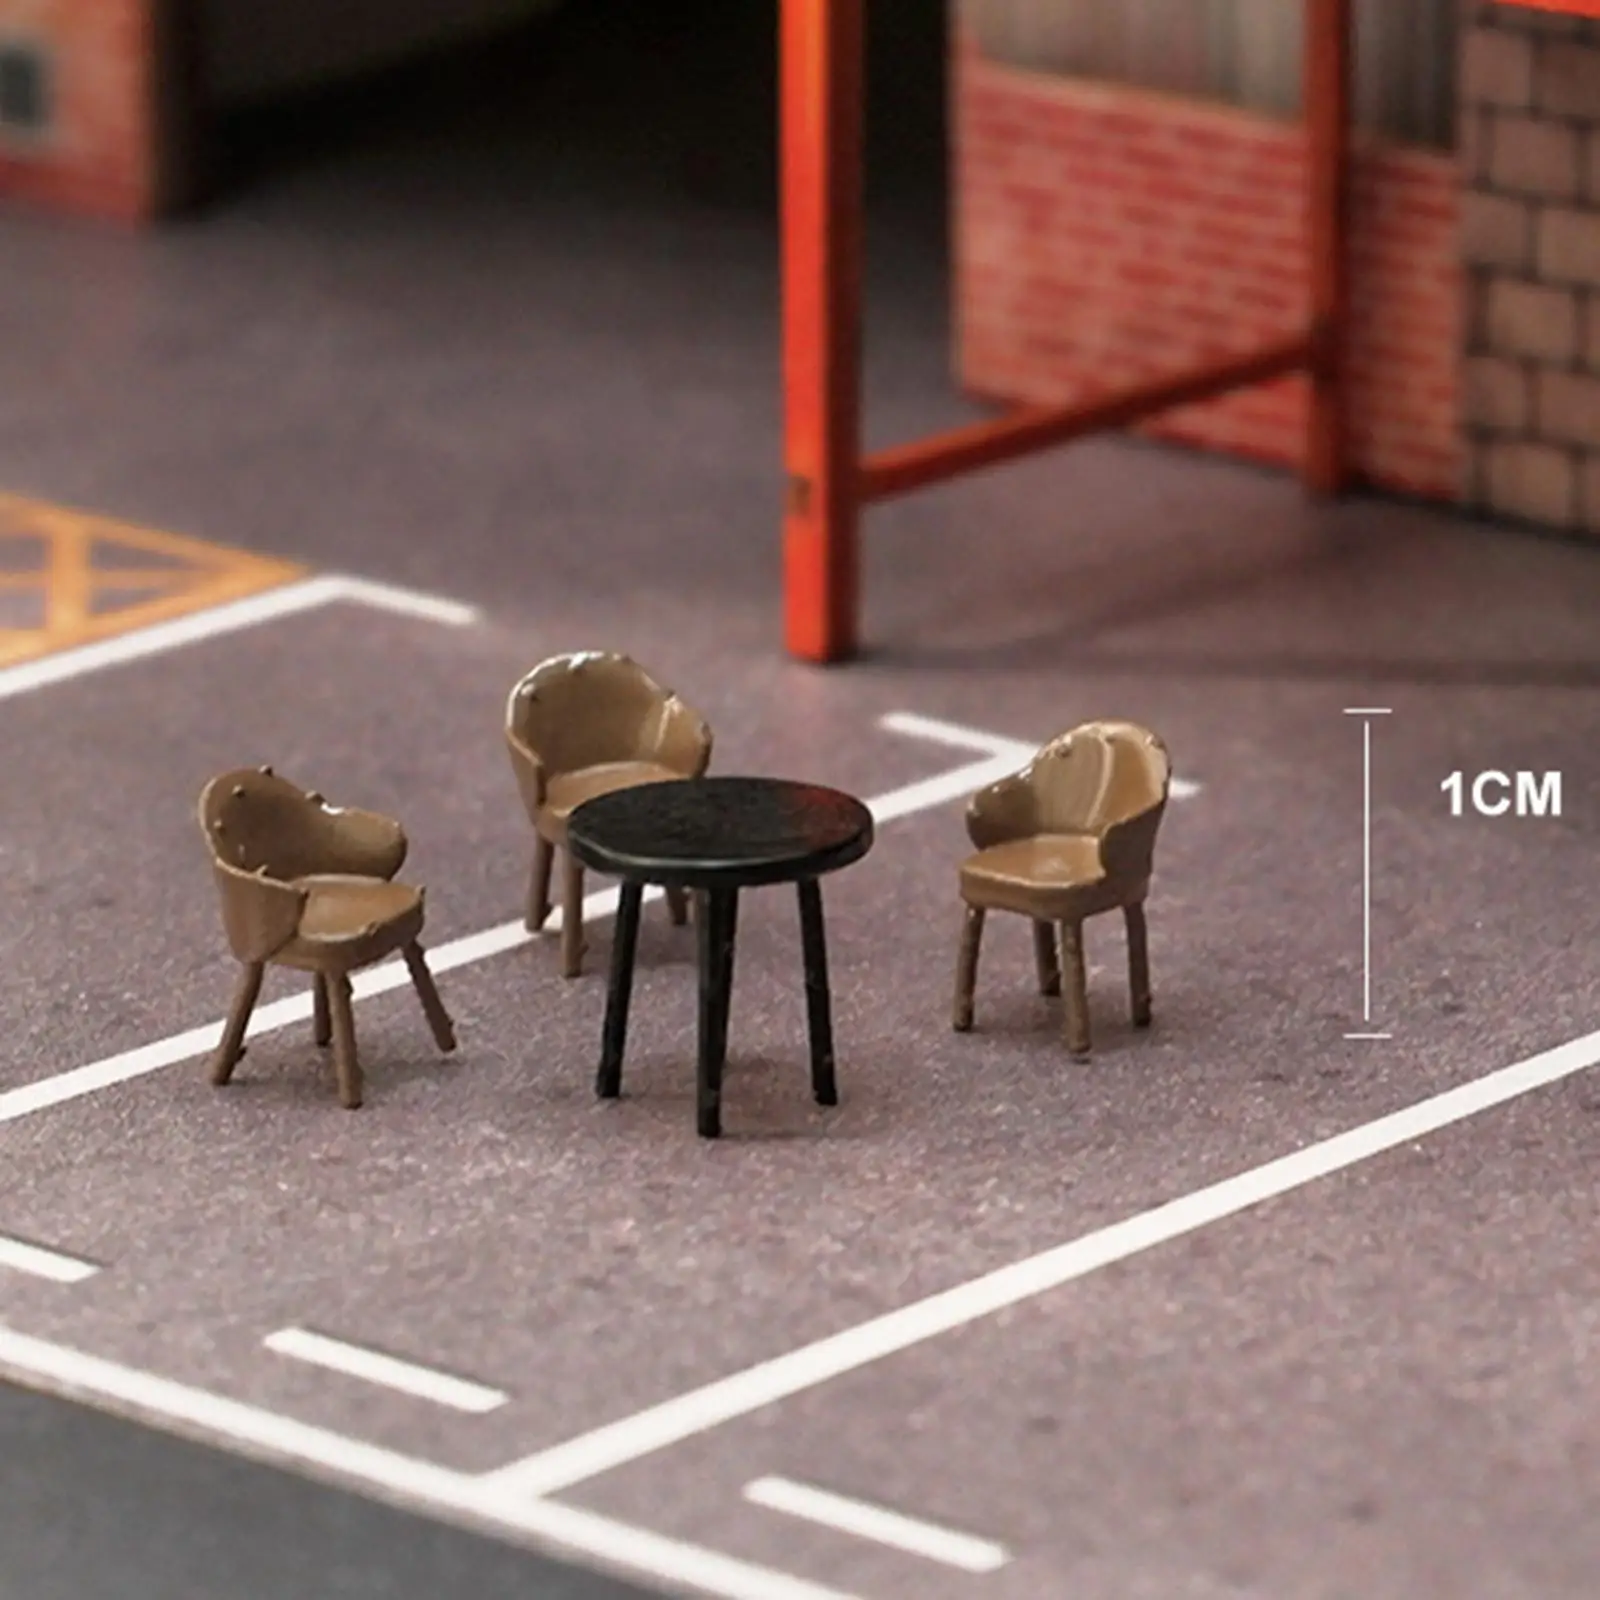 1/64 Scale Miniature Figure Tiny Scene Layout for Collections Micro Landscape Fariy Garden Dollhouse Accessories DIY Projects